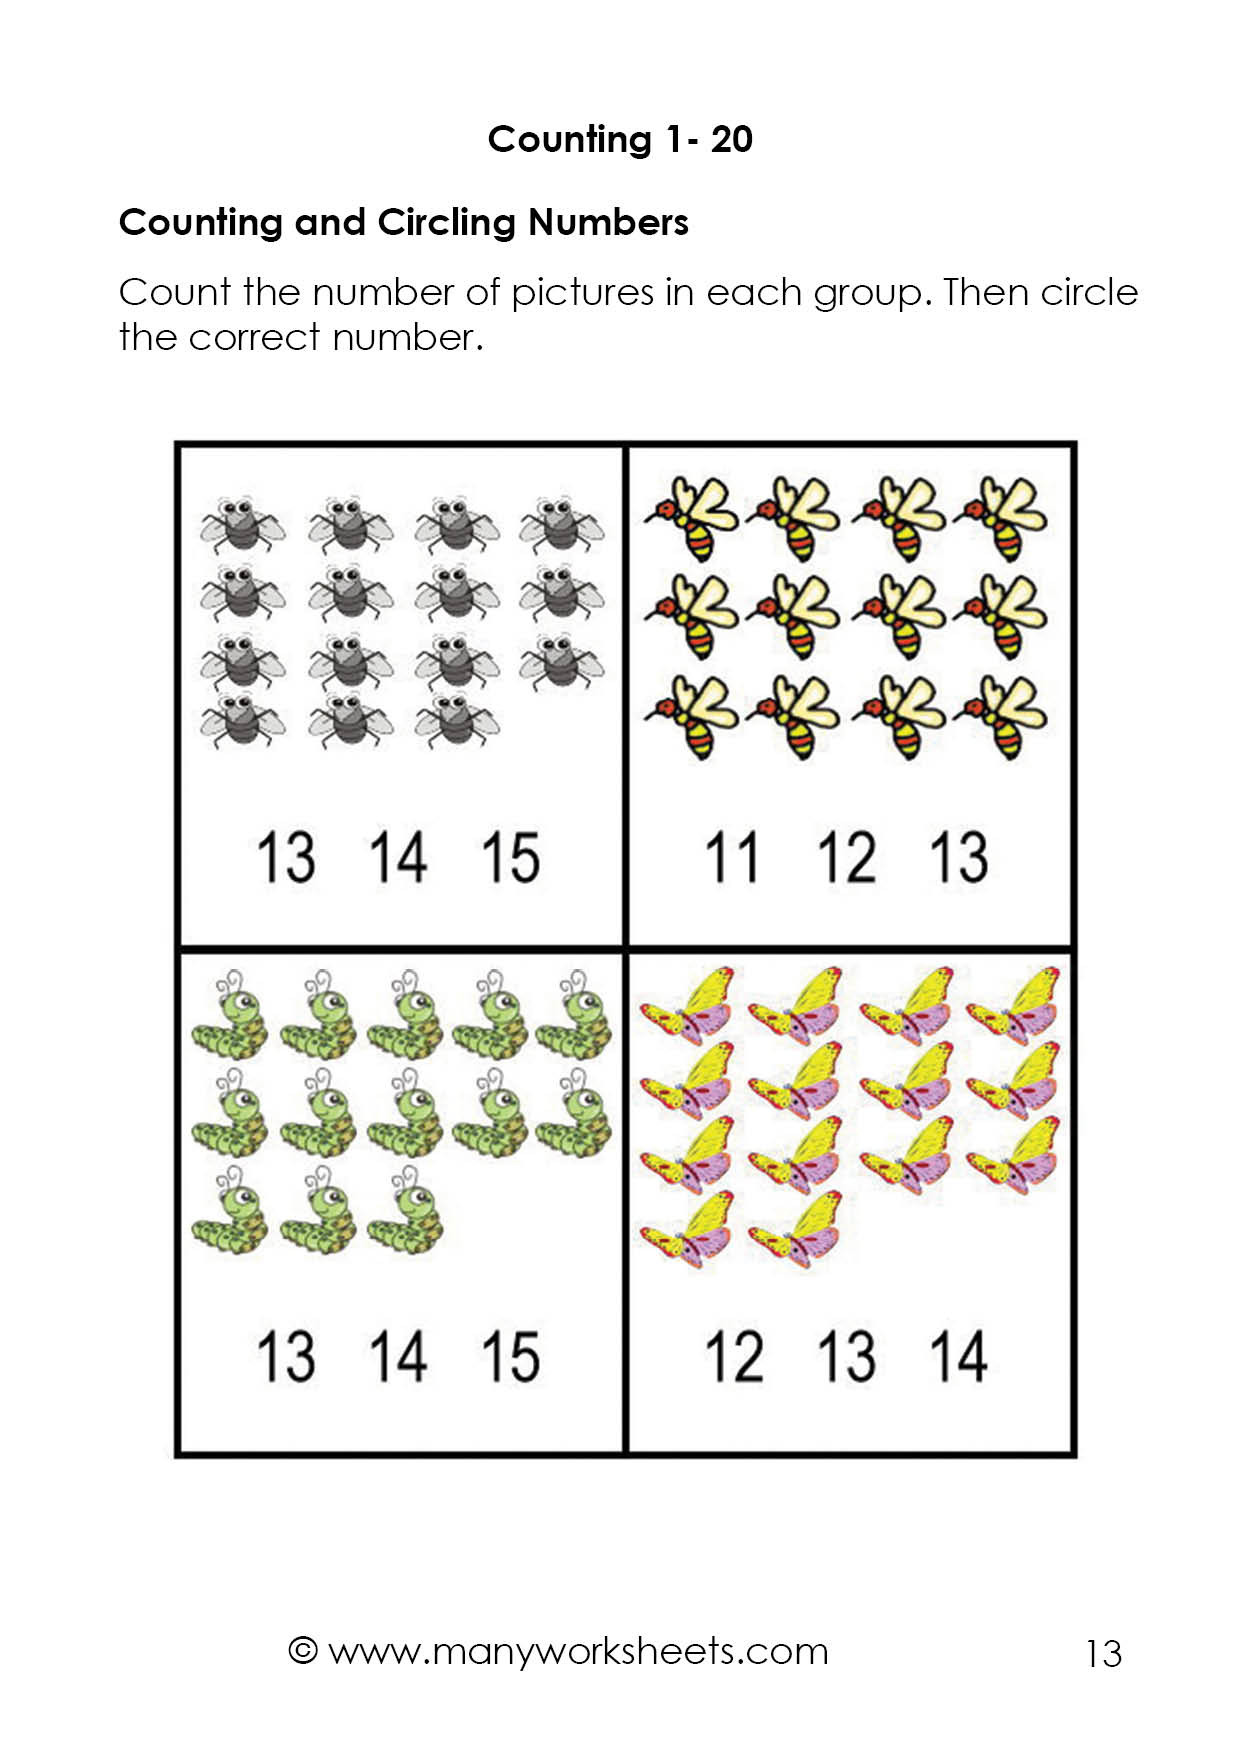 Counting to 20 Worksheet Counting to 20 and Circling the Numbers